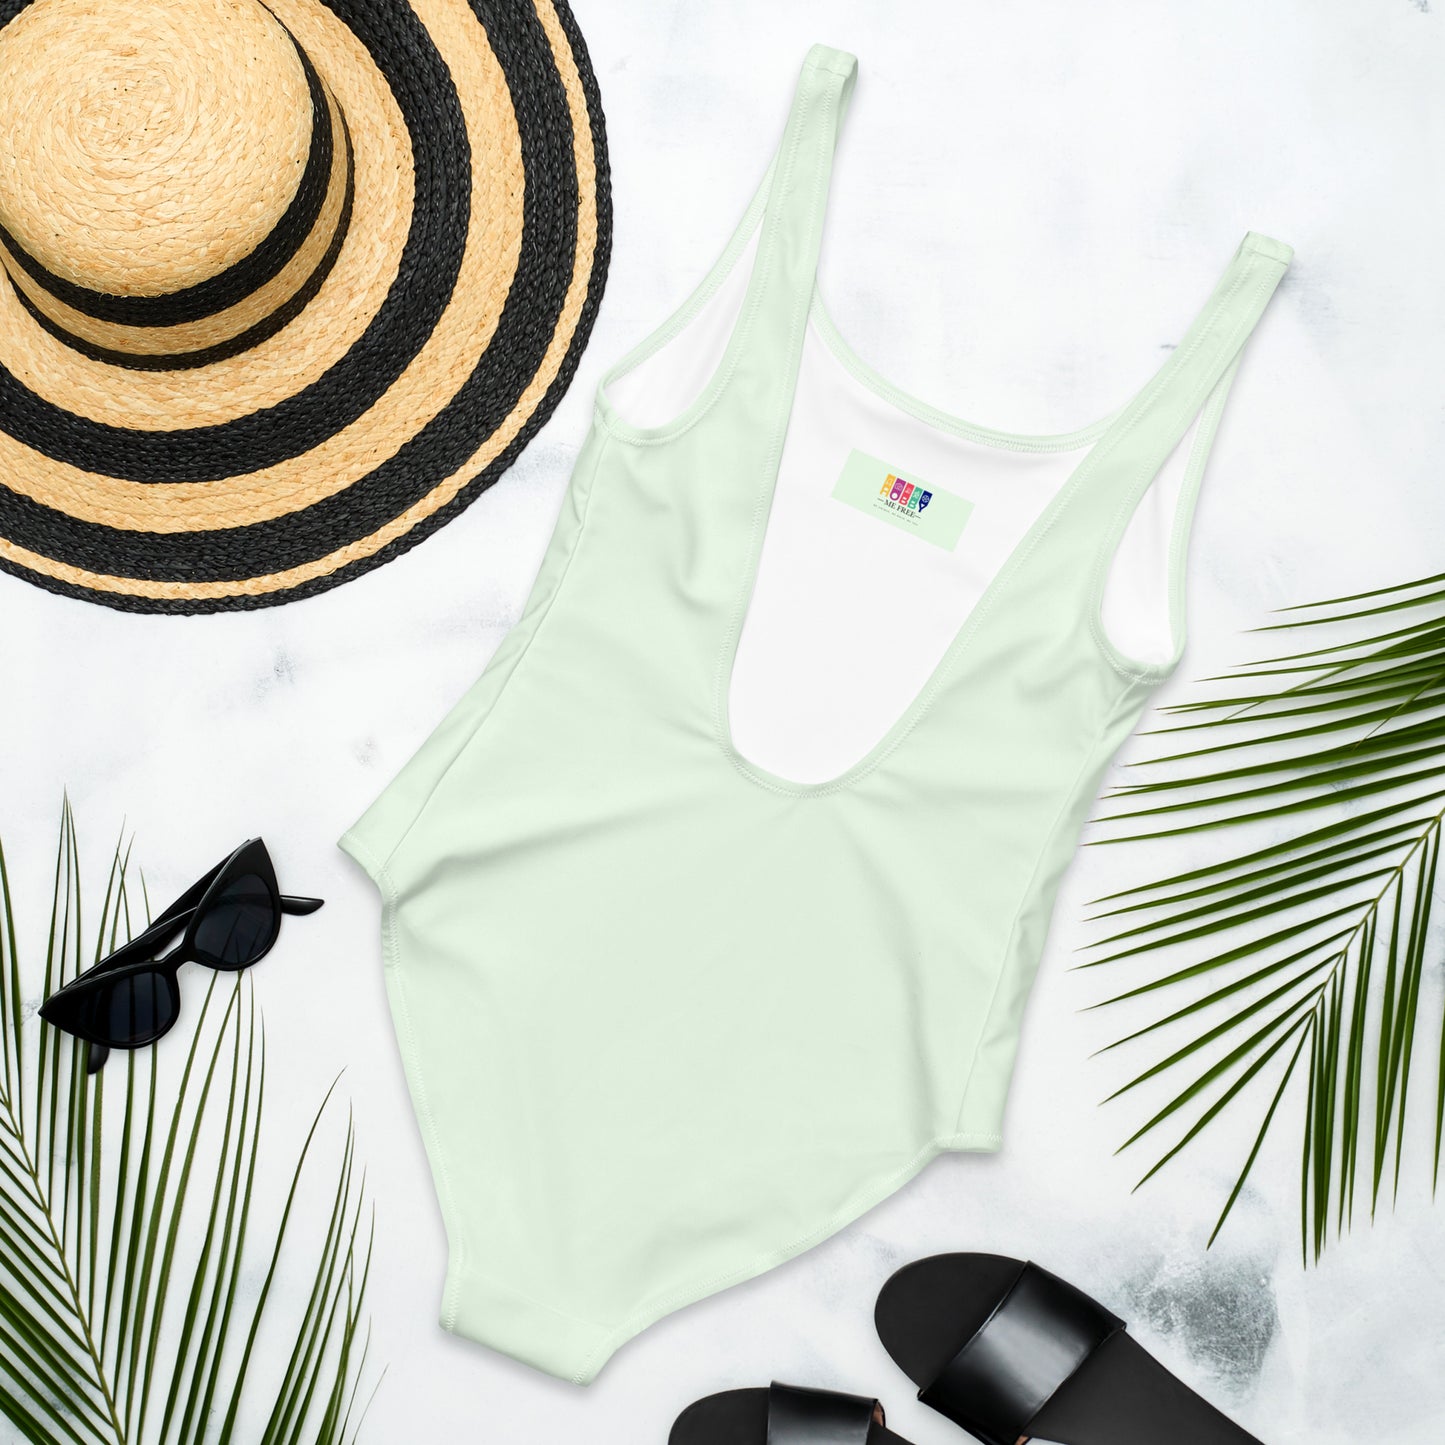 One piece swimsuit with a painted heart motive on a light green background - back